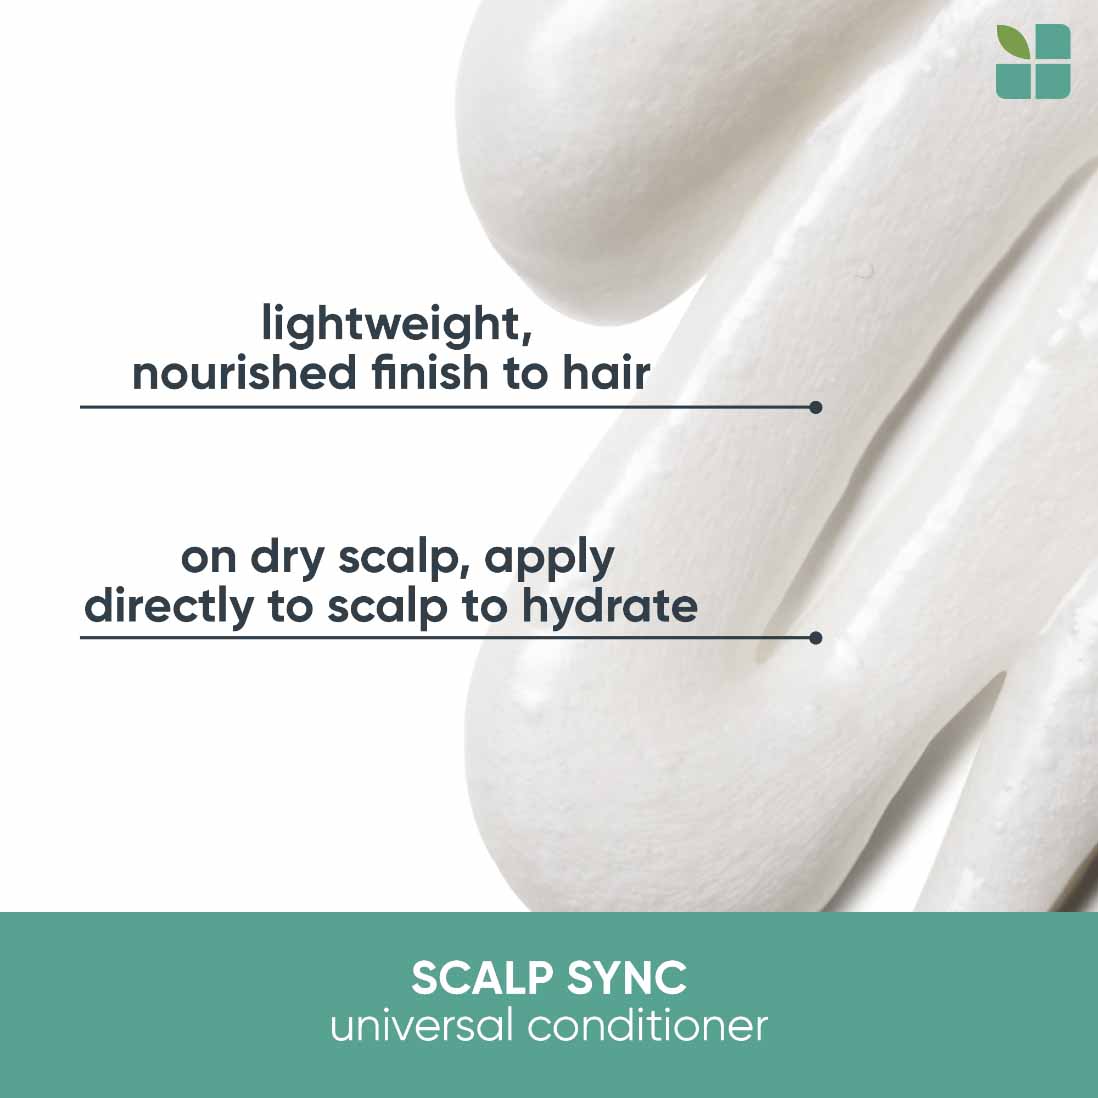 Biolage Scalpsync Clarifying Haircare Complete Set for Oily Hair